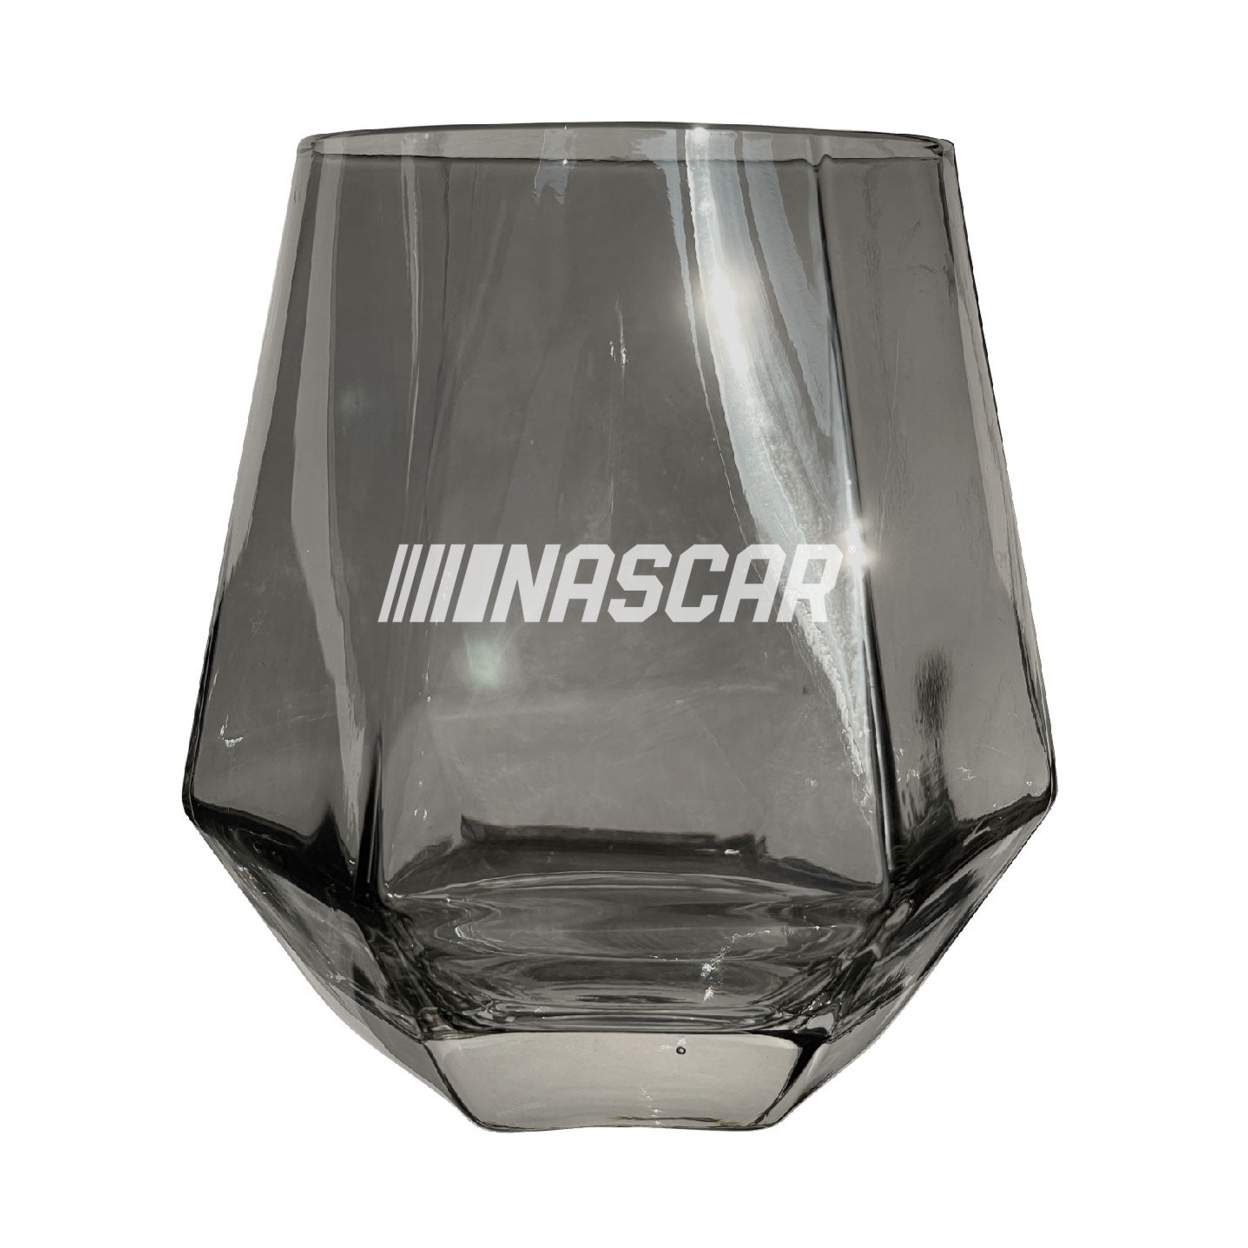 NASCAR Officially Licensed 10 Oz Engraved Diamond Wine Glass - Clear, 2-Pack